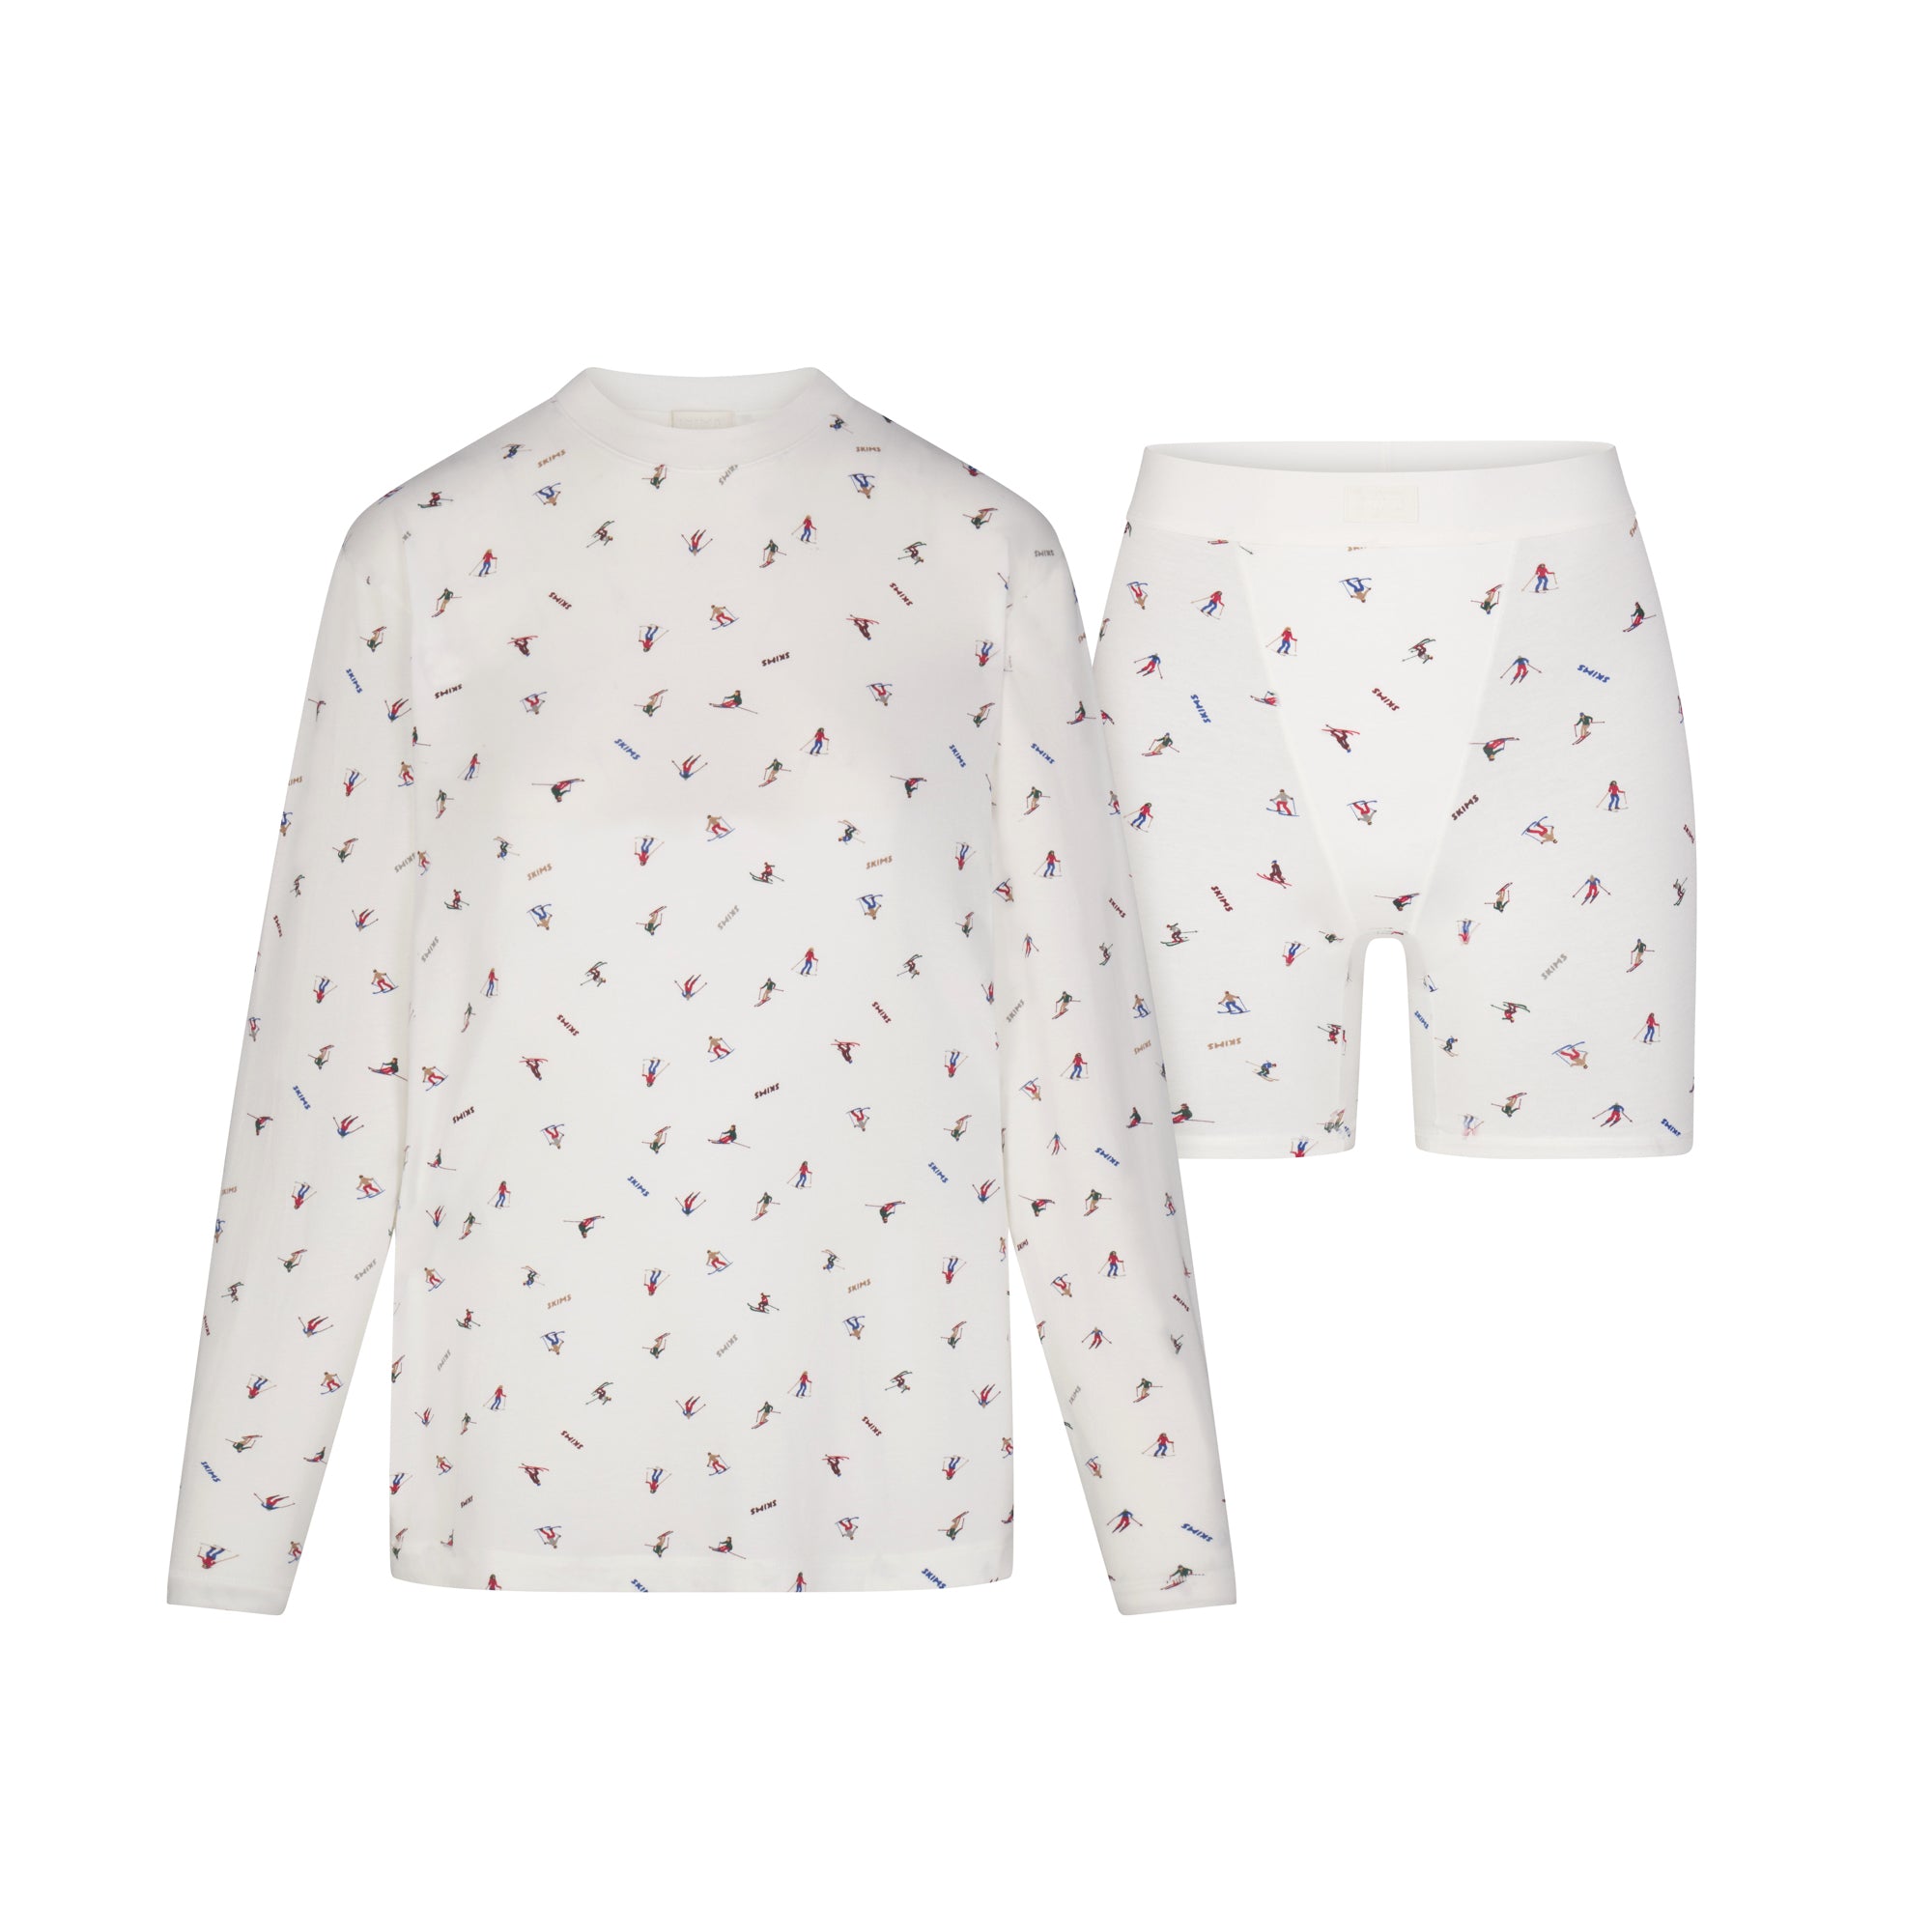 Yes, Stylish Christmas Pyjamas Exist —28 Pairs That Are Fashion Editor-Approved